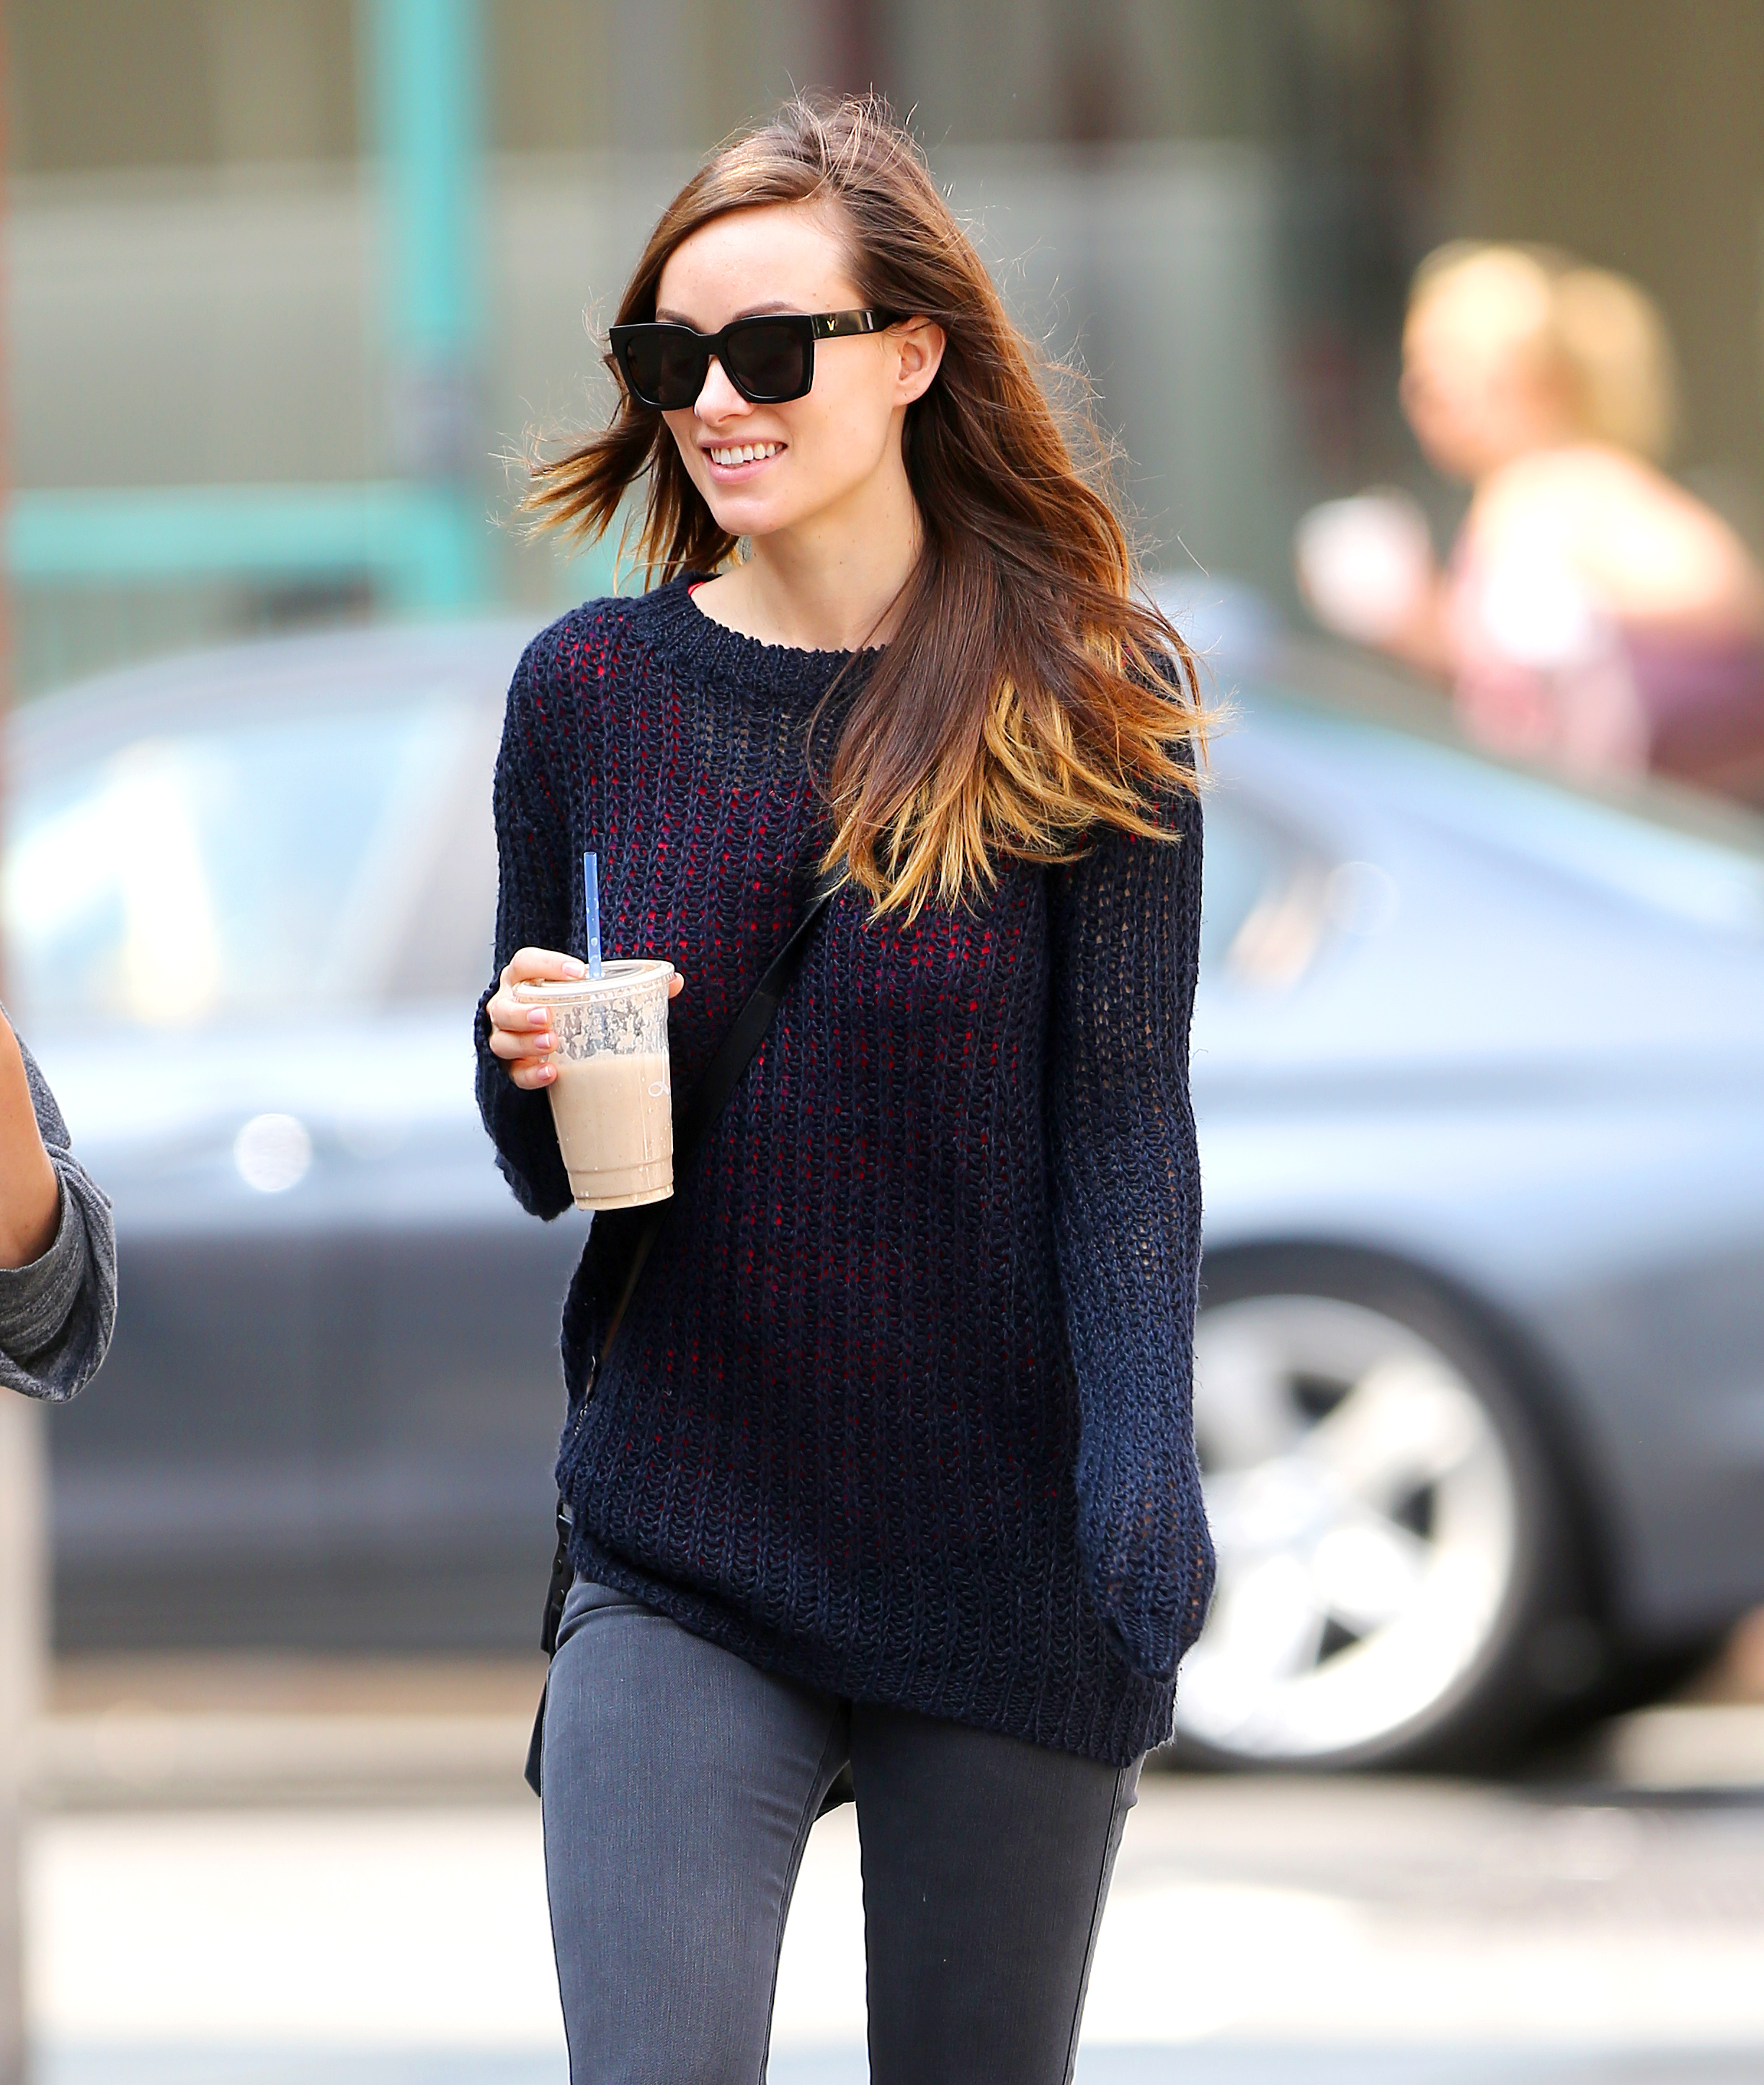 Olivia Wilde in Tight Pants Out in NYC. 